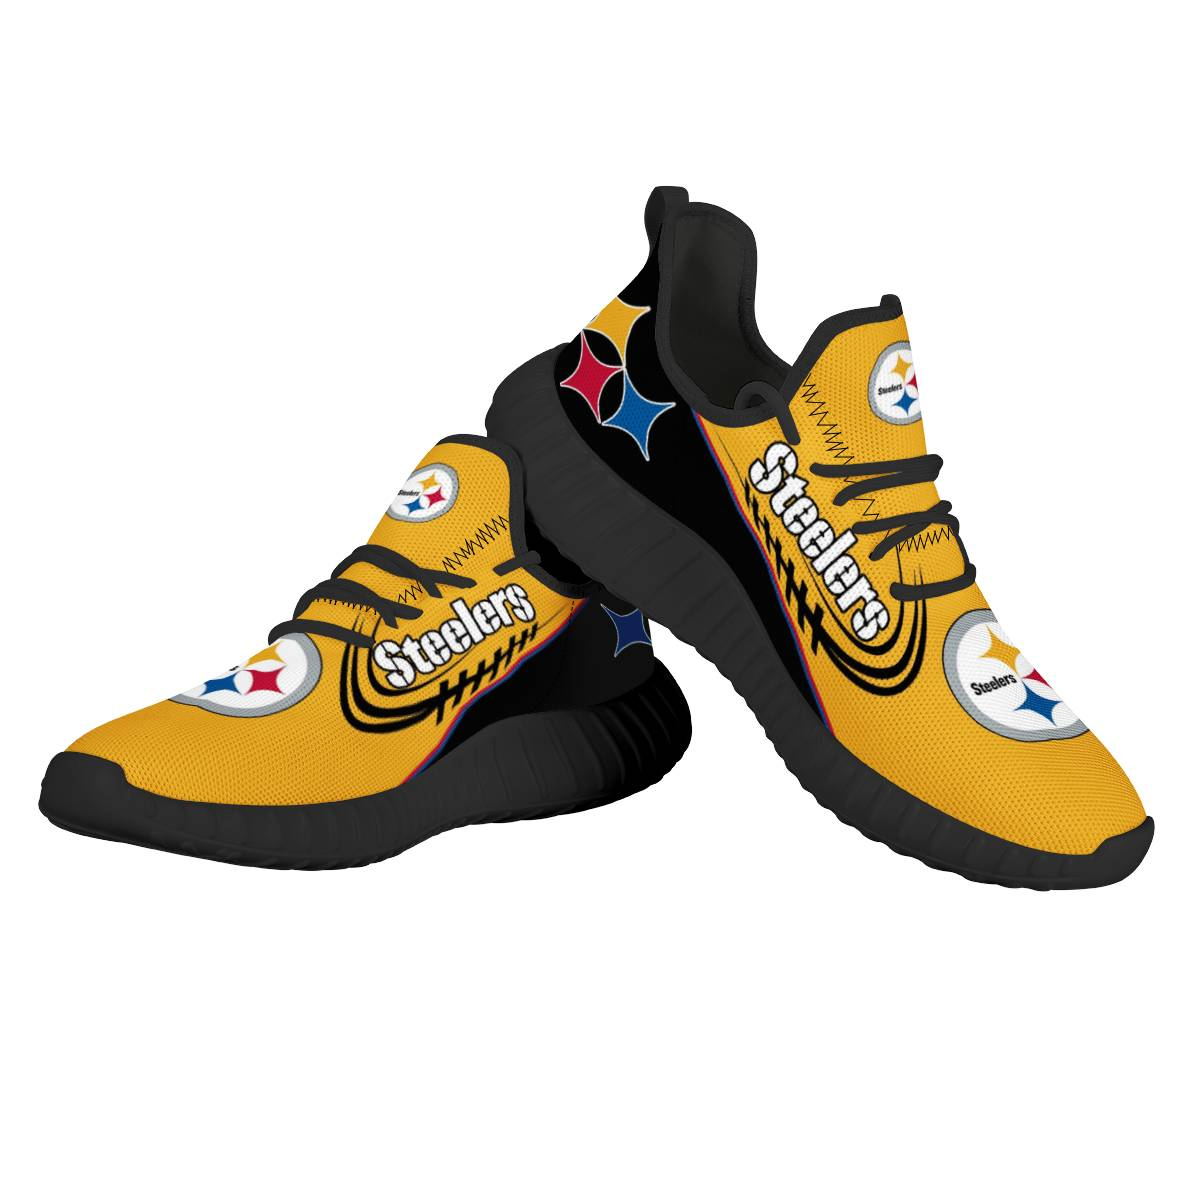 Men's NFL Pittsburgh Steelers Mesh Knit Sneakers/Shoes 004